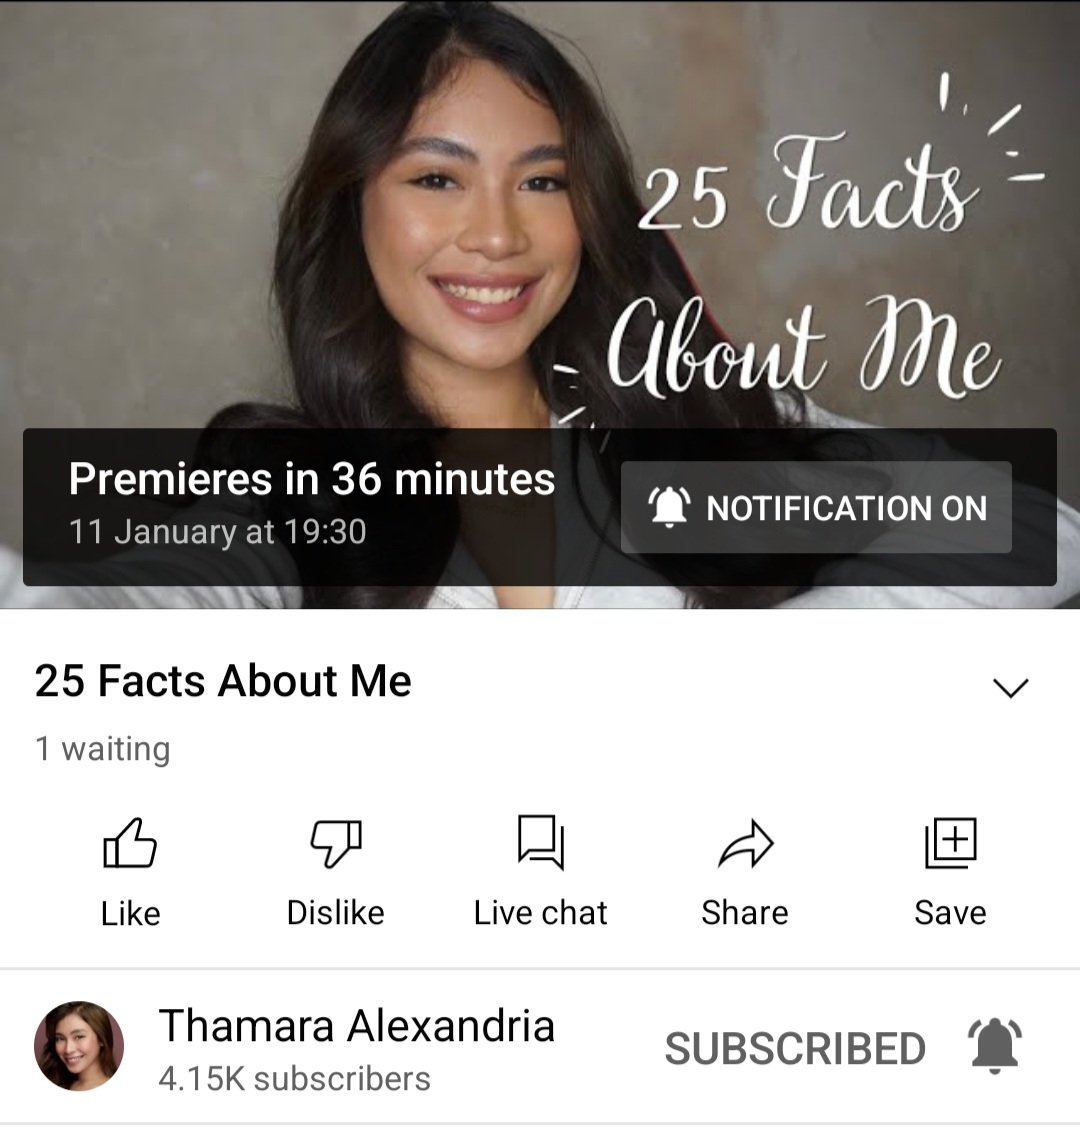 Hola! Set your alarms mga mhie, Thamara's new vlog will be up at 7:30pm. Let's get to know her more! ✨️💜

CLICK THIS LINK:
youtu.be/amy0XN-gpqU

#YouTube #newvlog
#ThamaraAlexandria | @thamaraalxndria